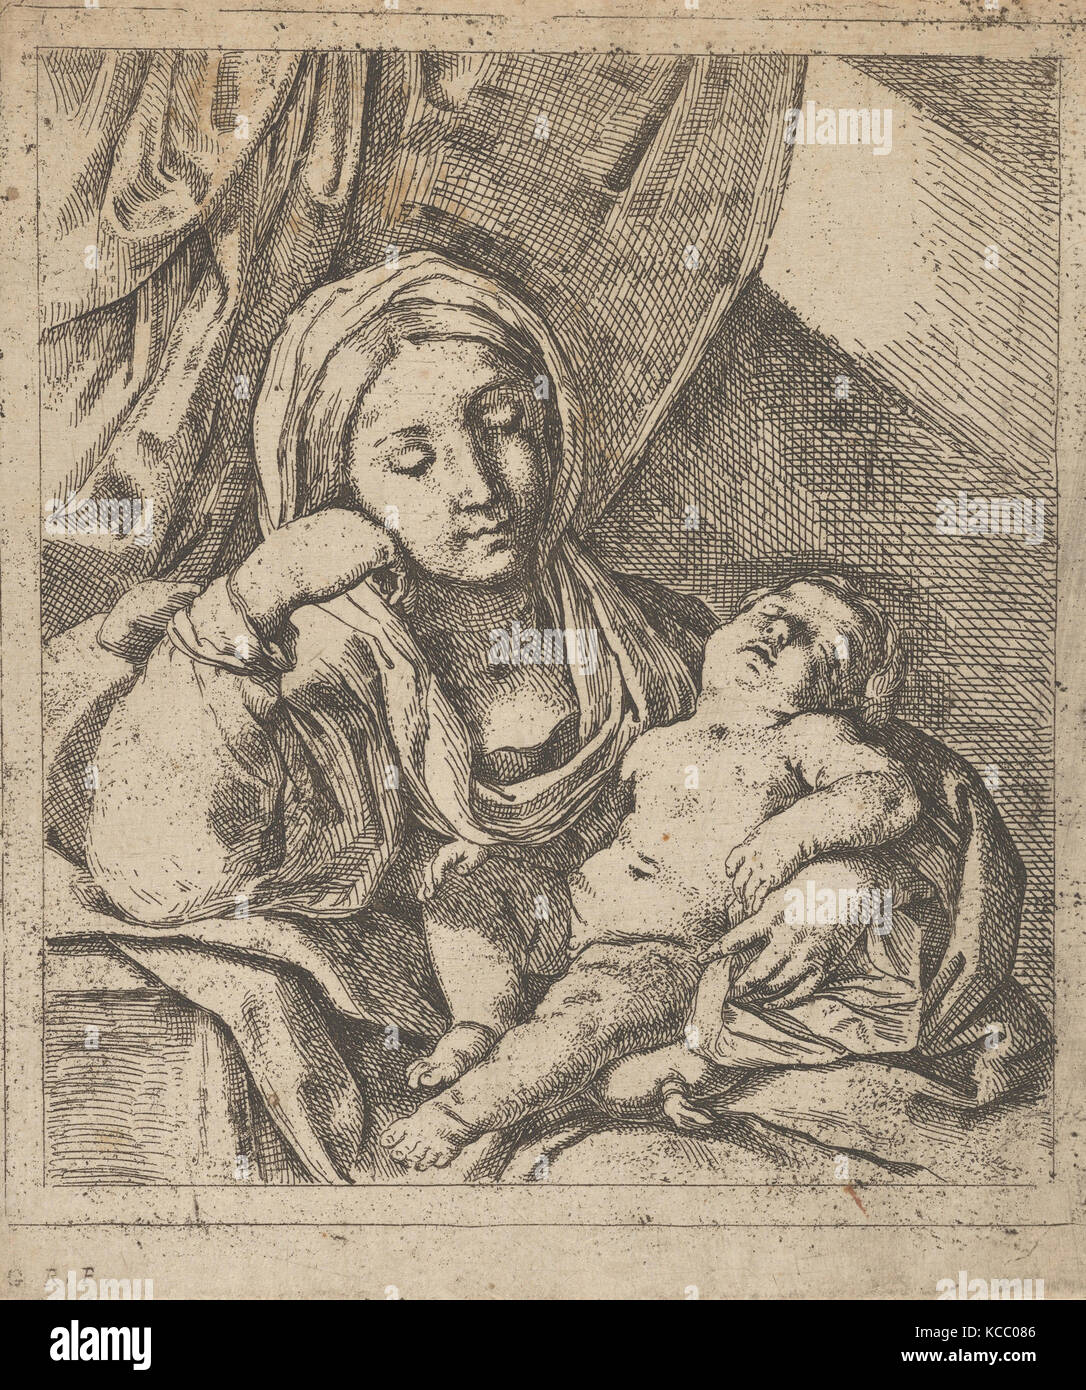 The Virgin seated, resting her head on her right hand and holding the sleeping infant Christ on her lap Stock Photo